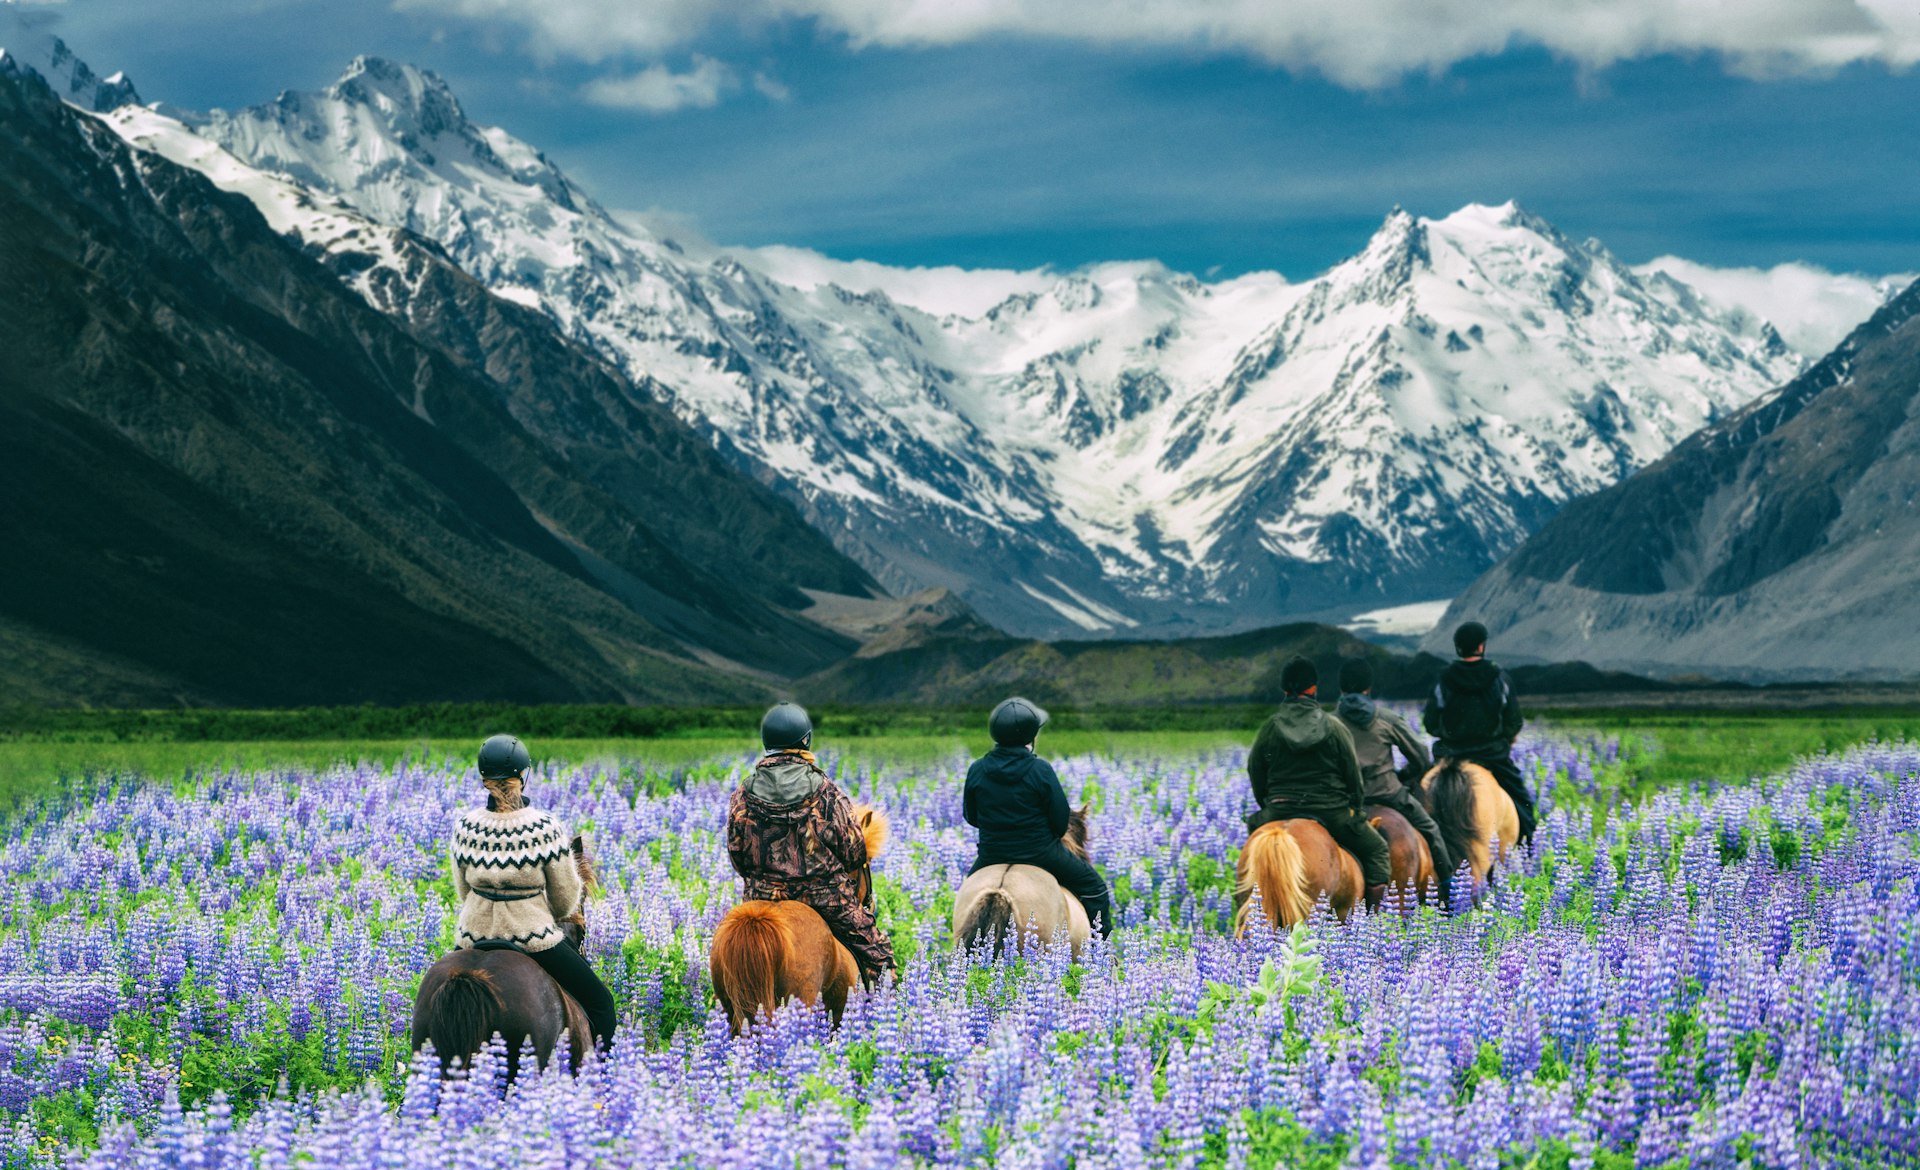 Travelers ride horses in lupine flower field, overlooking the beautiful landscape of Mt Cook National Park in New Zealand